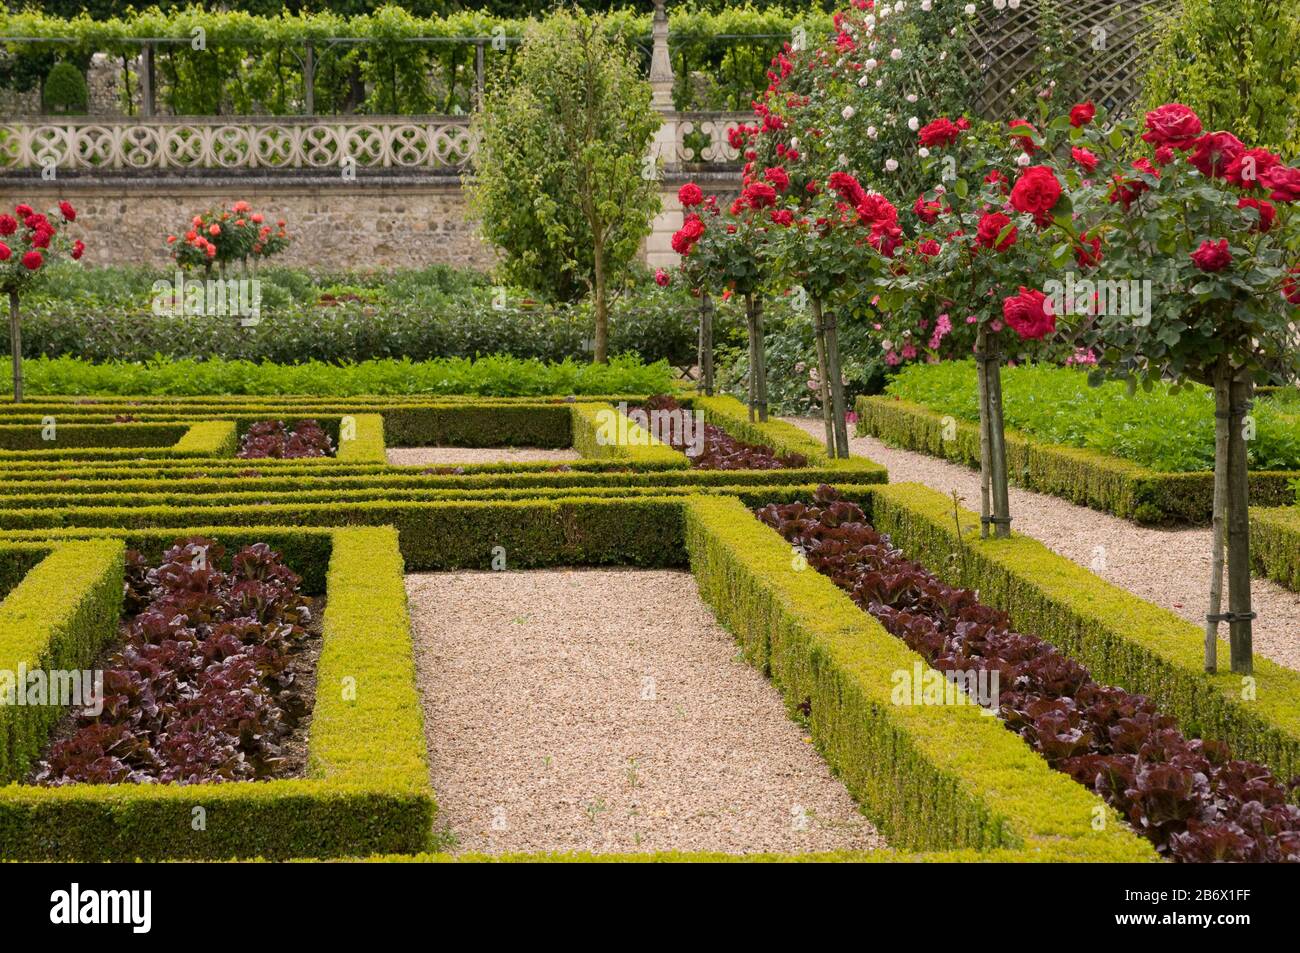 The Chateau de Villandry is a grand country house in the Loire region best known for its fabulous garden. Stock Photo